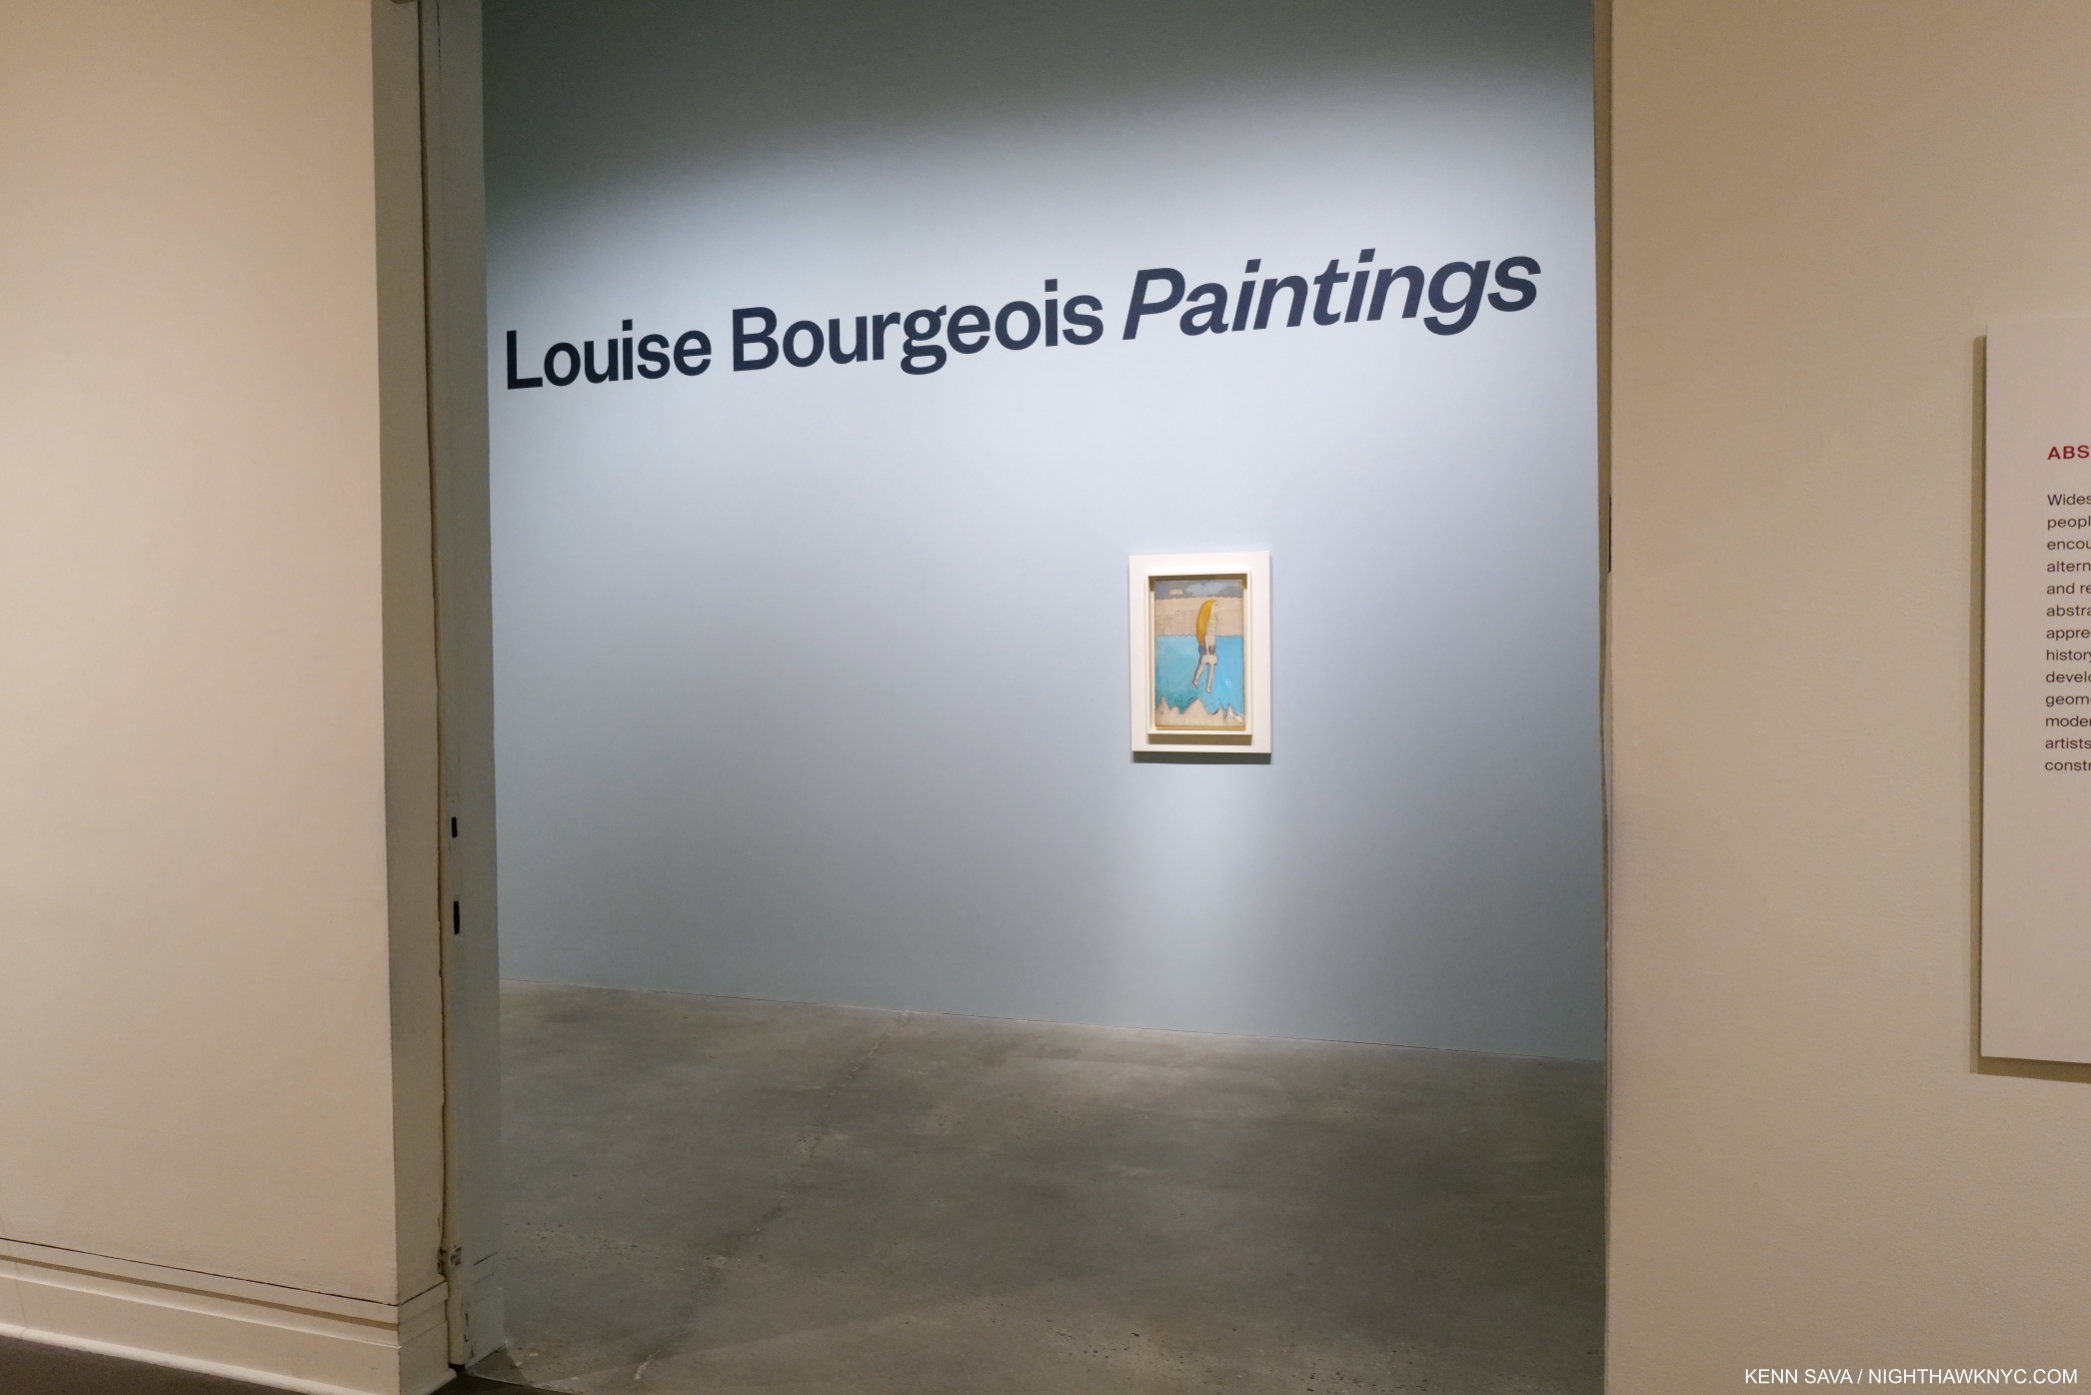 The Jewish Museum Takes Louise Bourgeois at her Word; Her Work